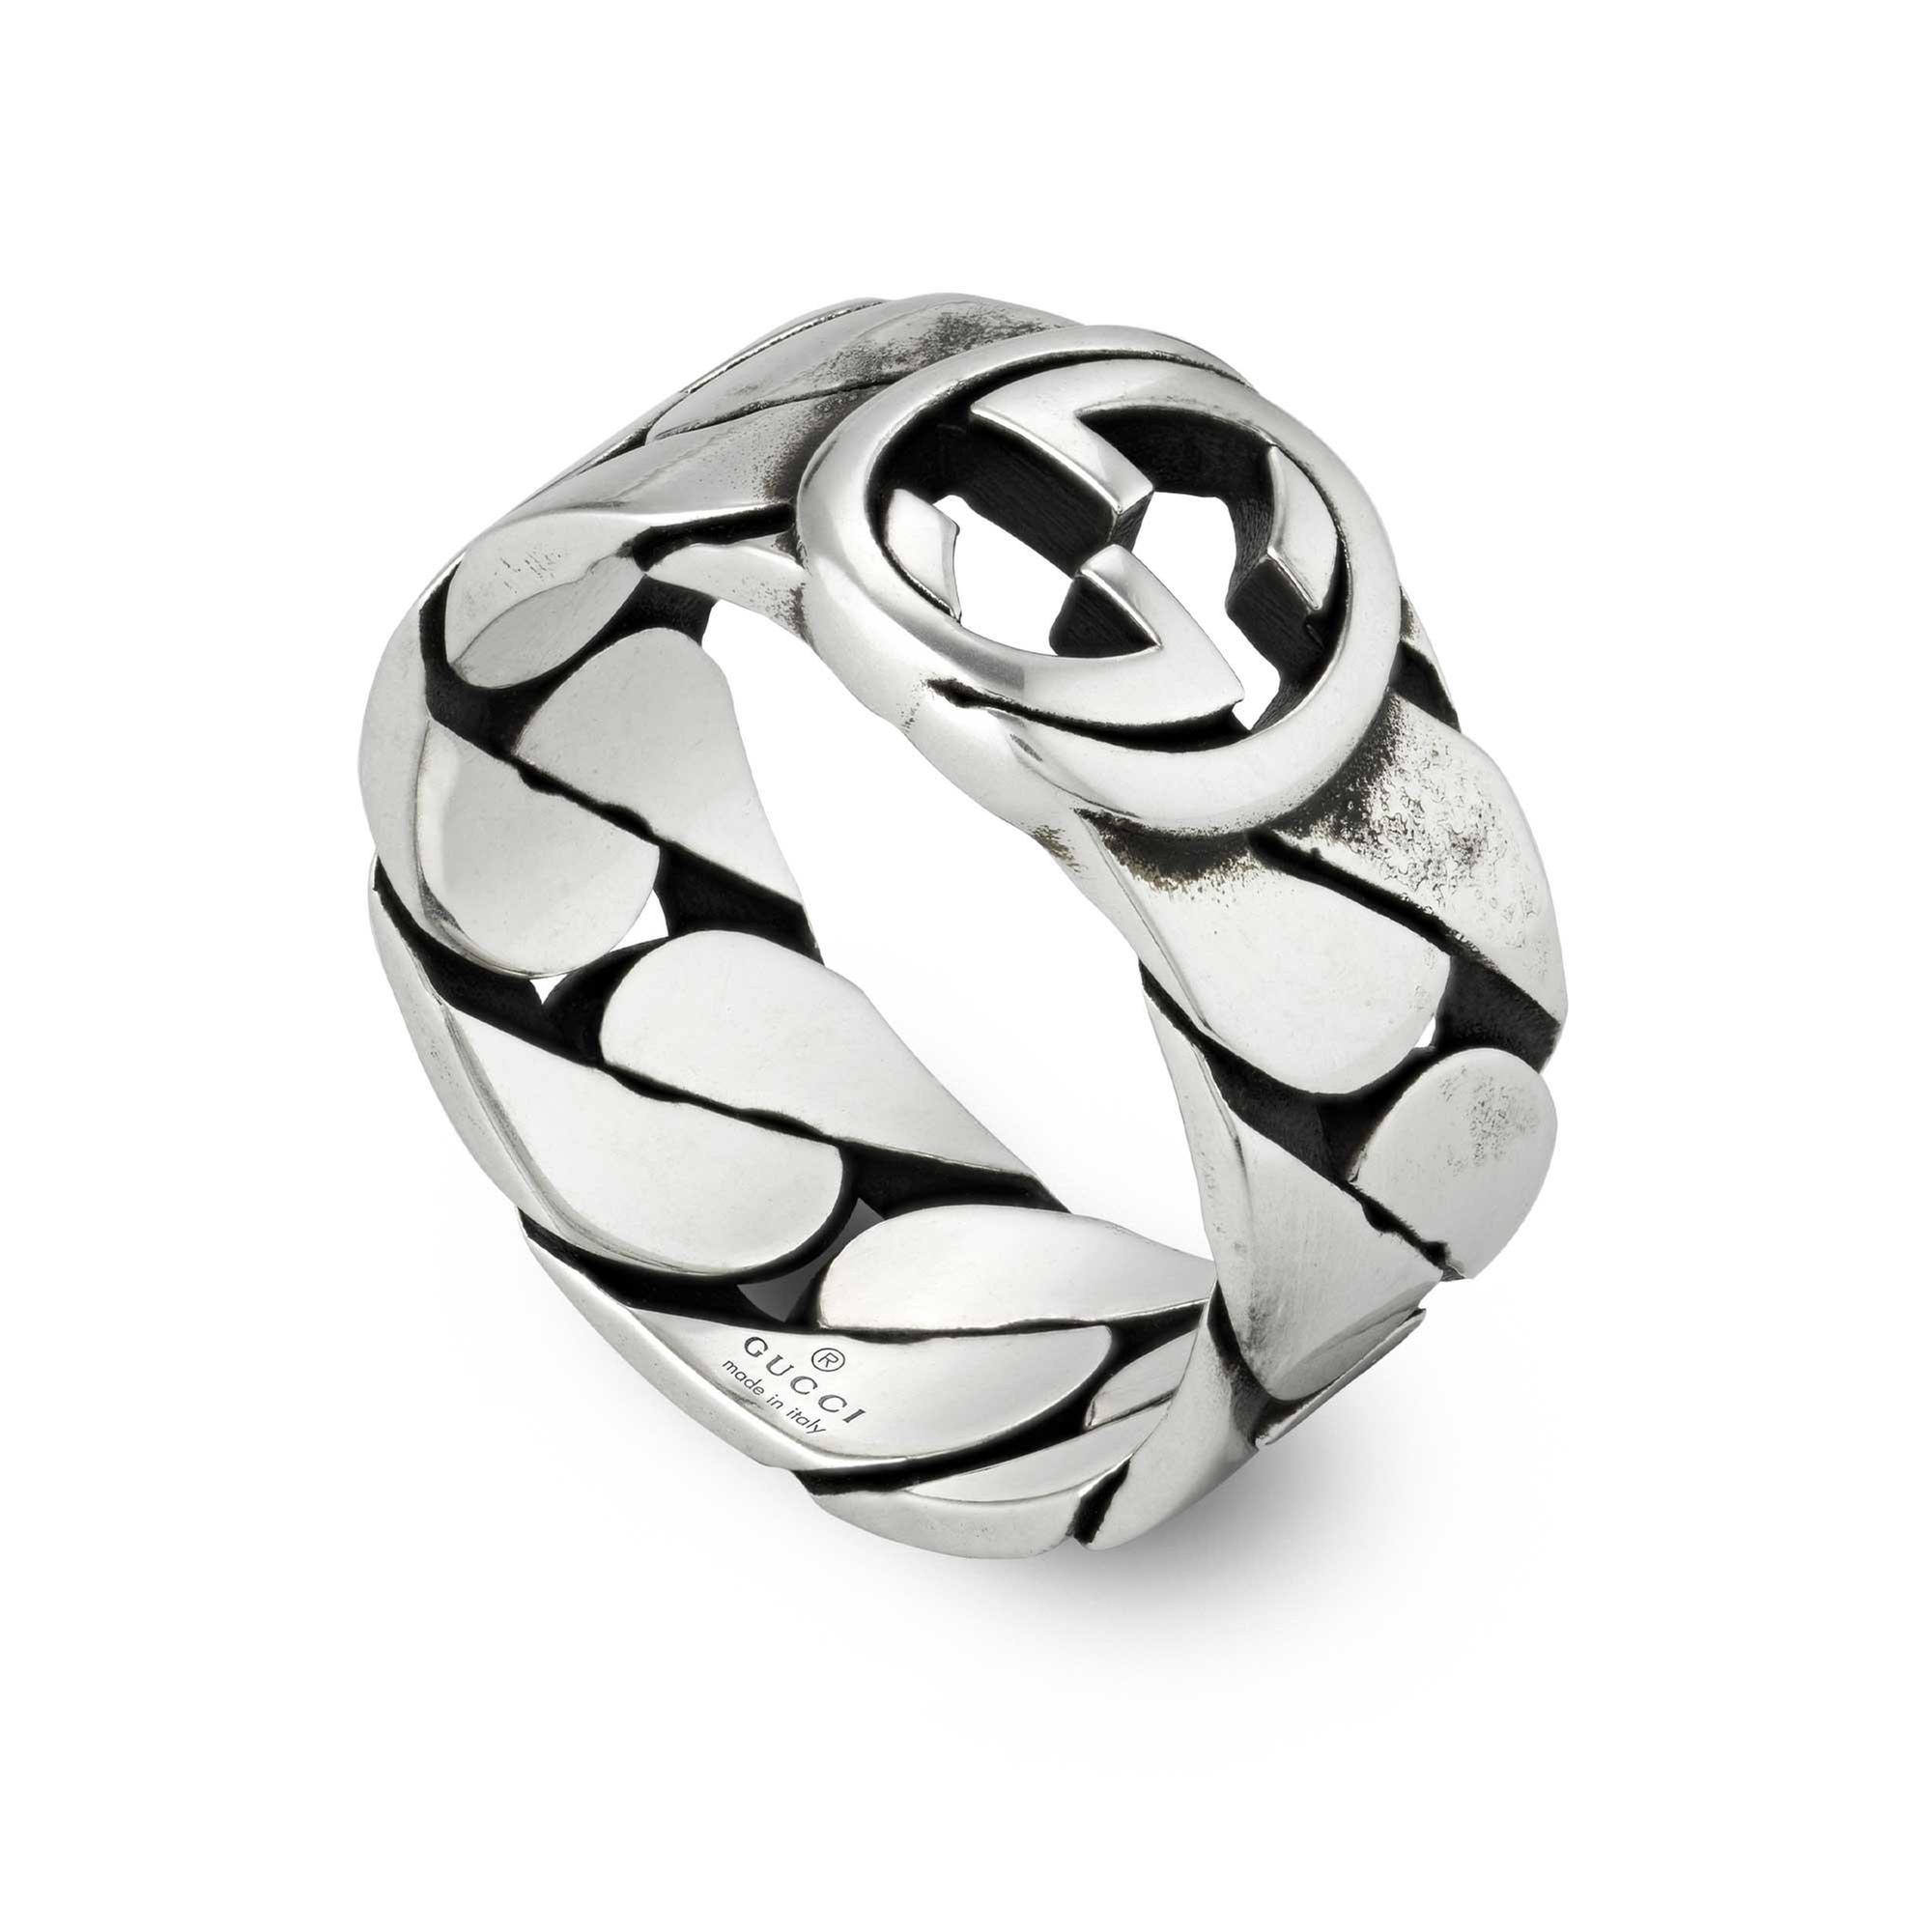 Men's Gucci Interlocking G Ring in Sterling Silver, 8mm - Size 10